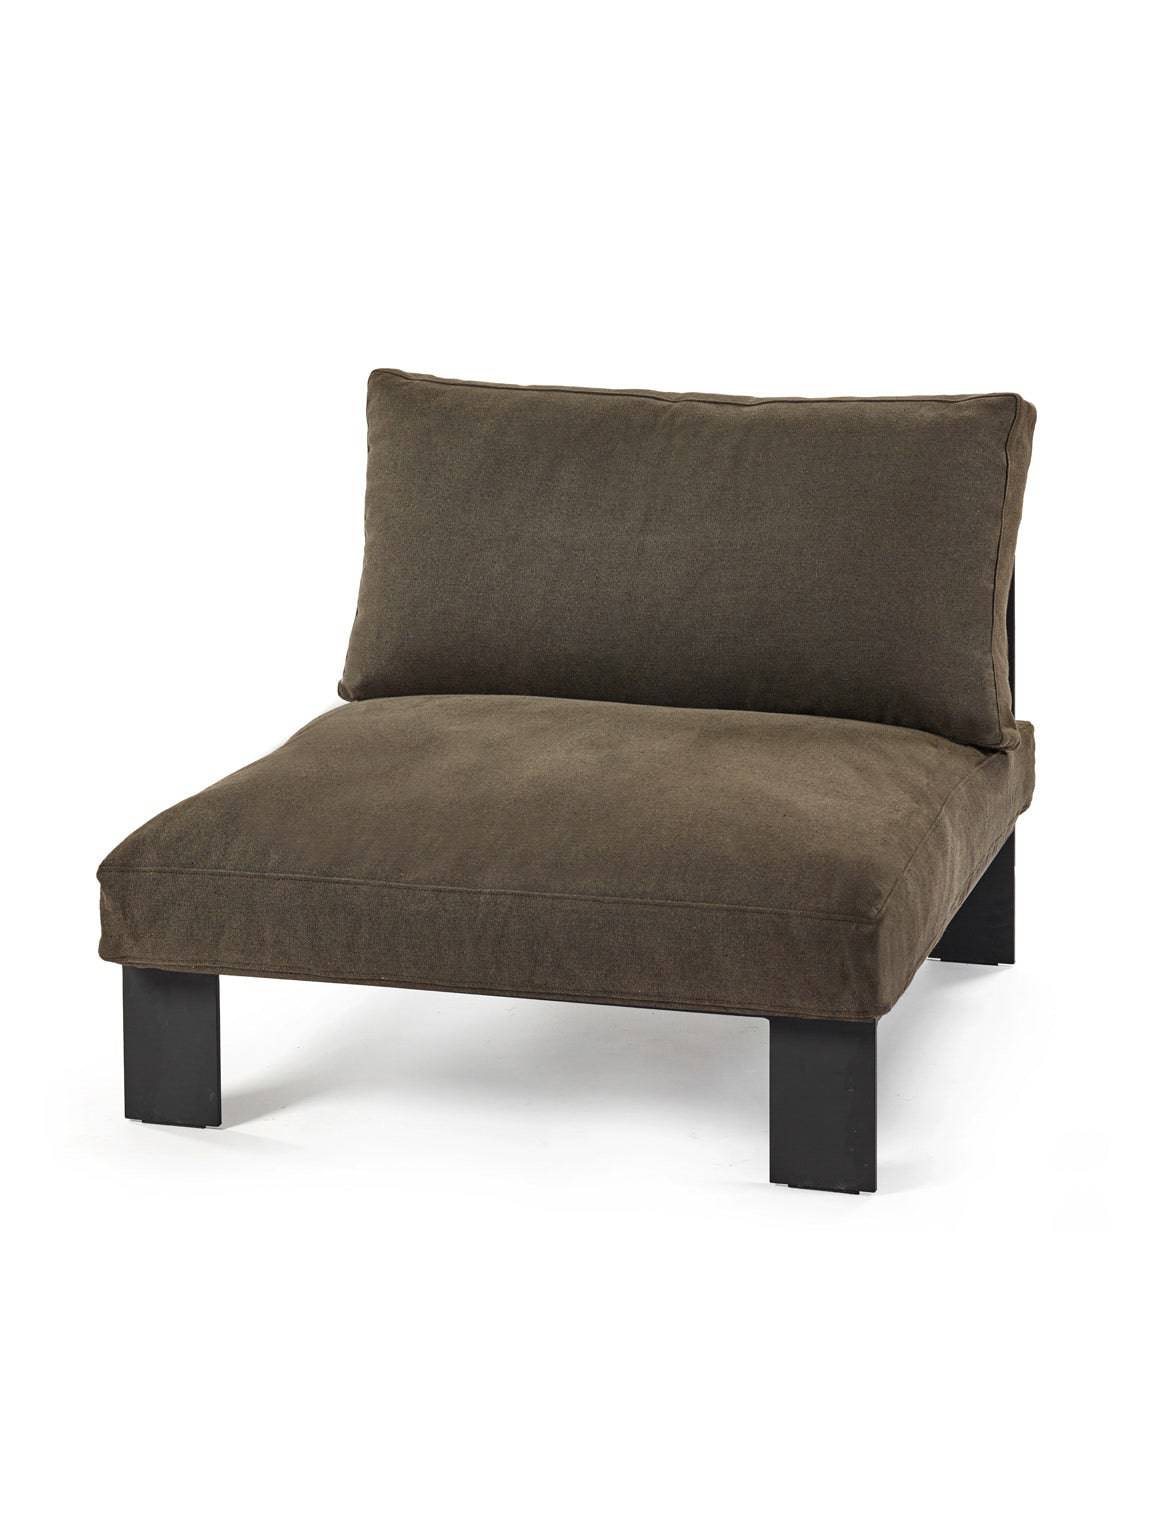 Mombaers Lounge Chair - Sepia - THAT COOL LIVING